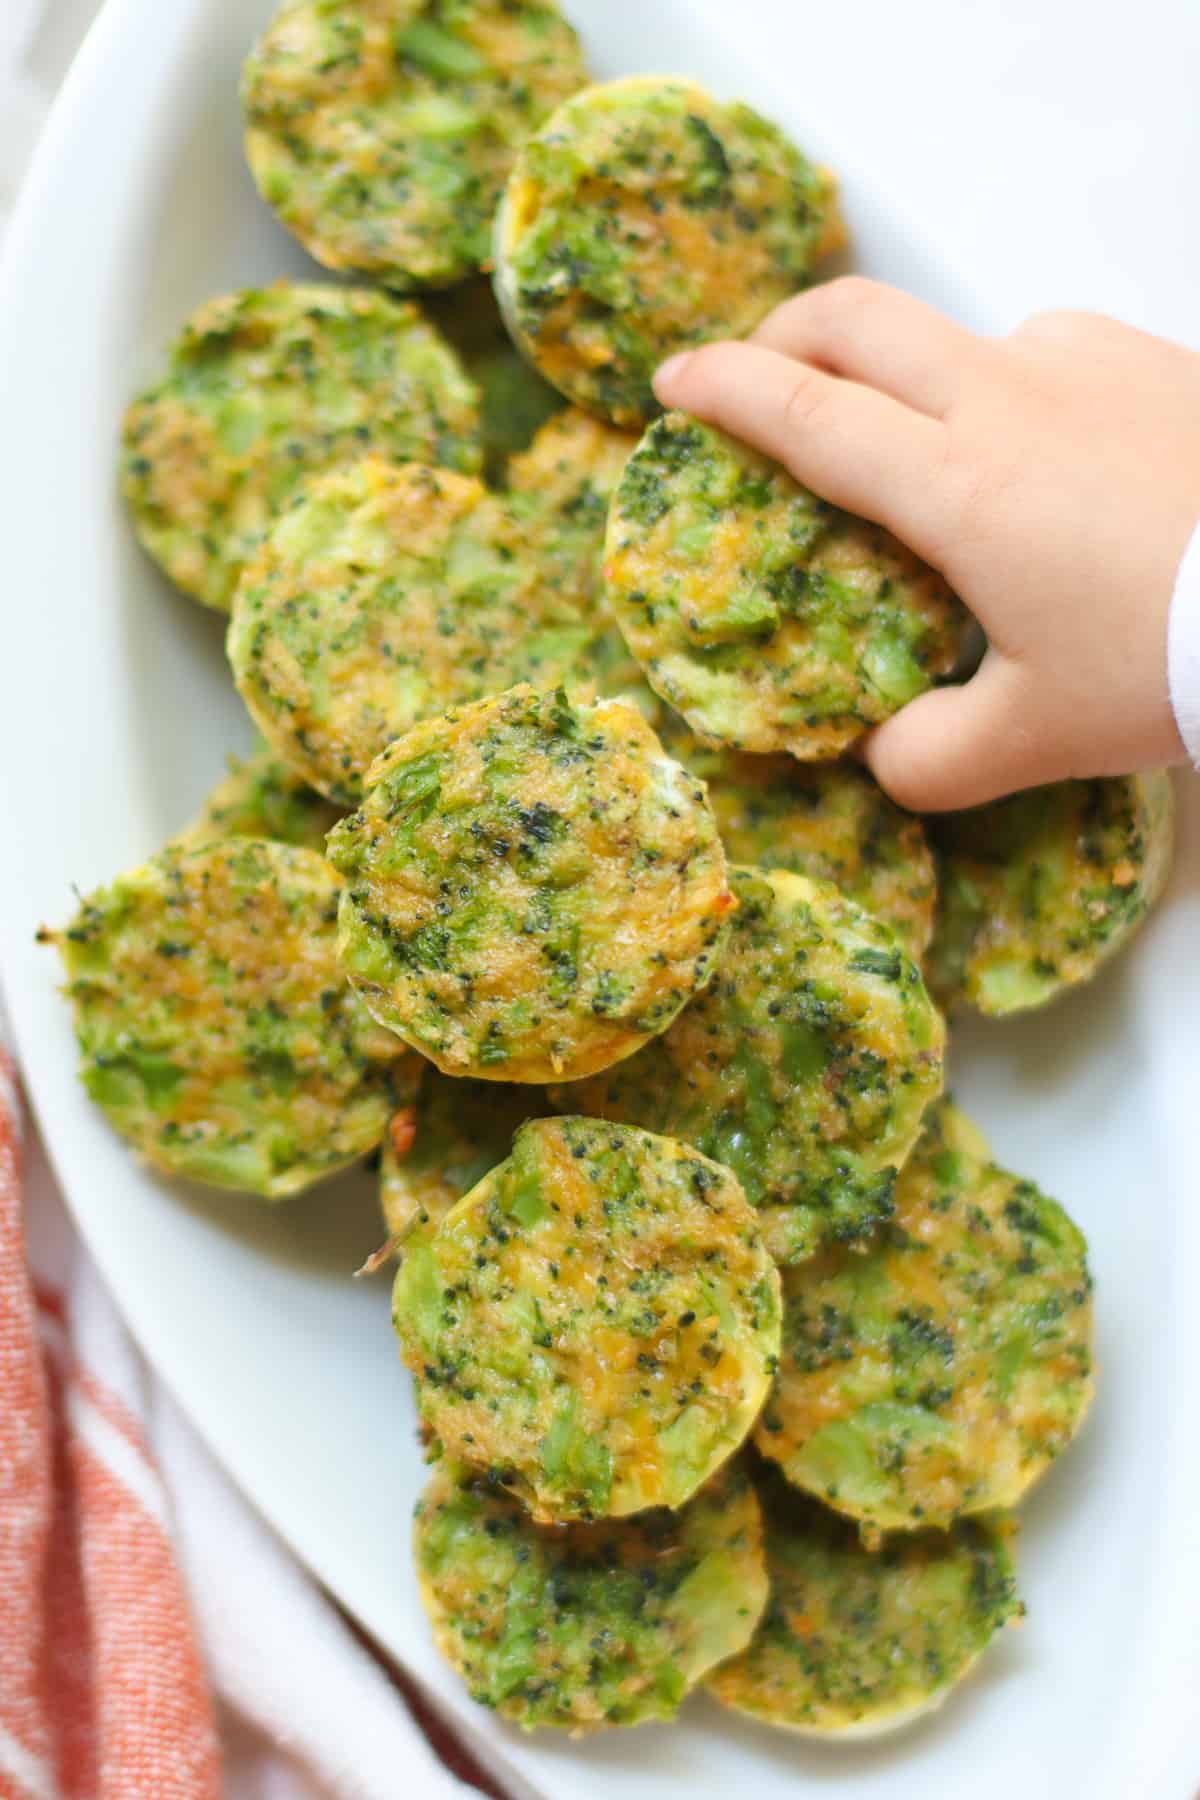 Broccoli bites piled on high on a white plate with a toddler's hand.